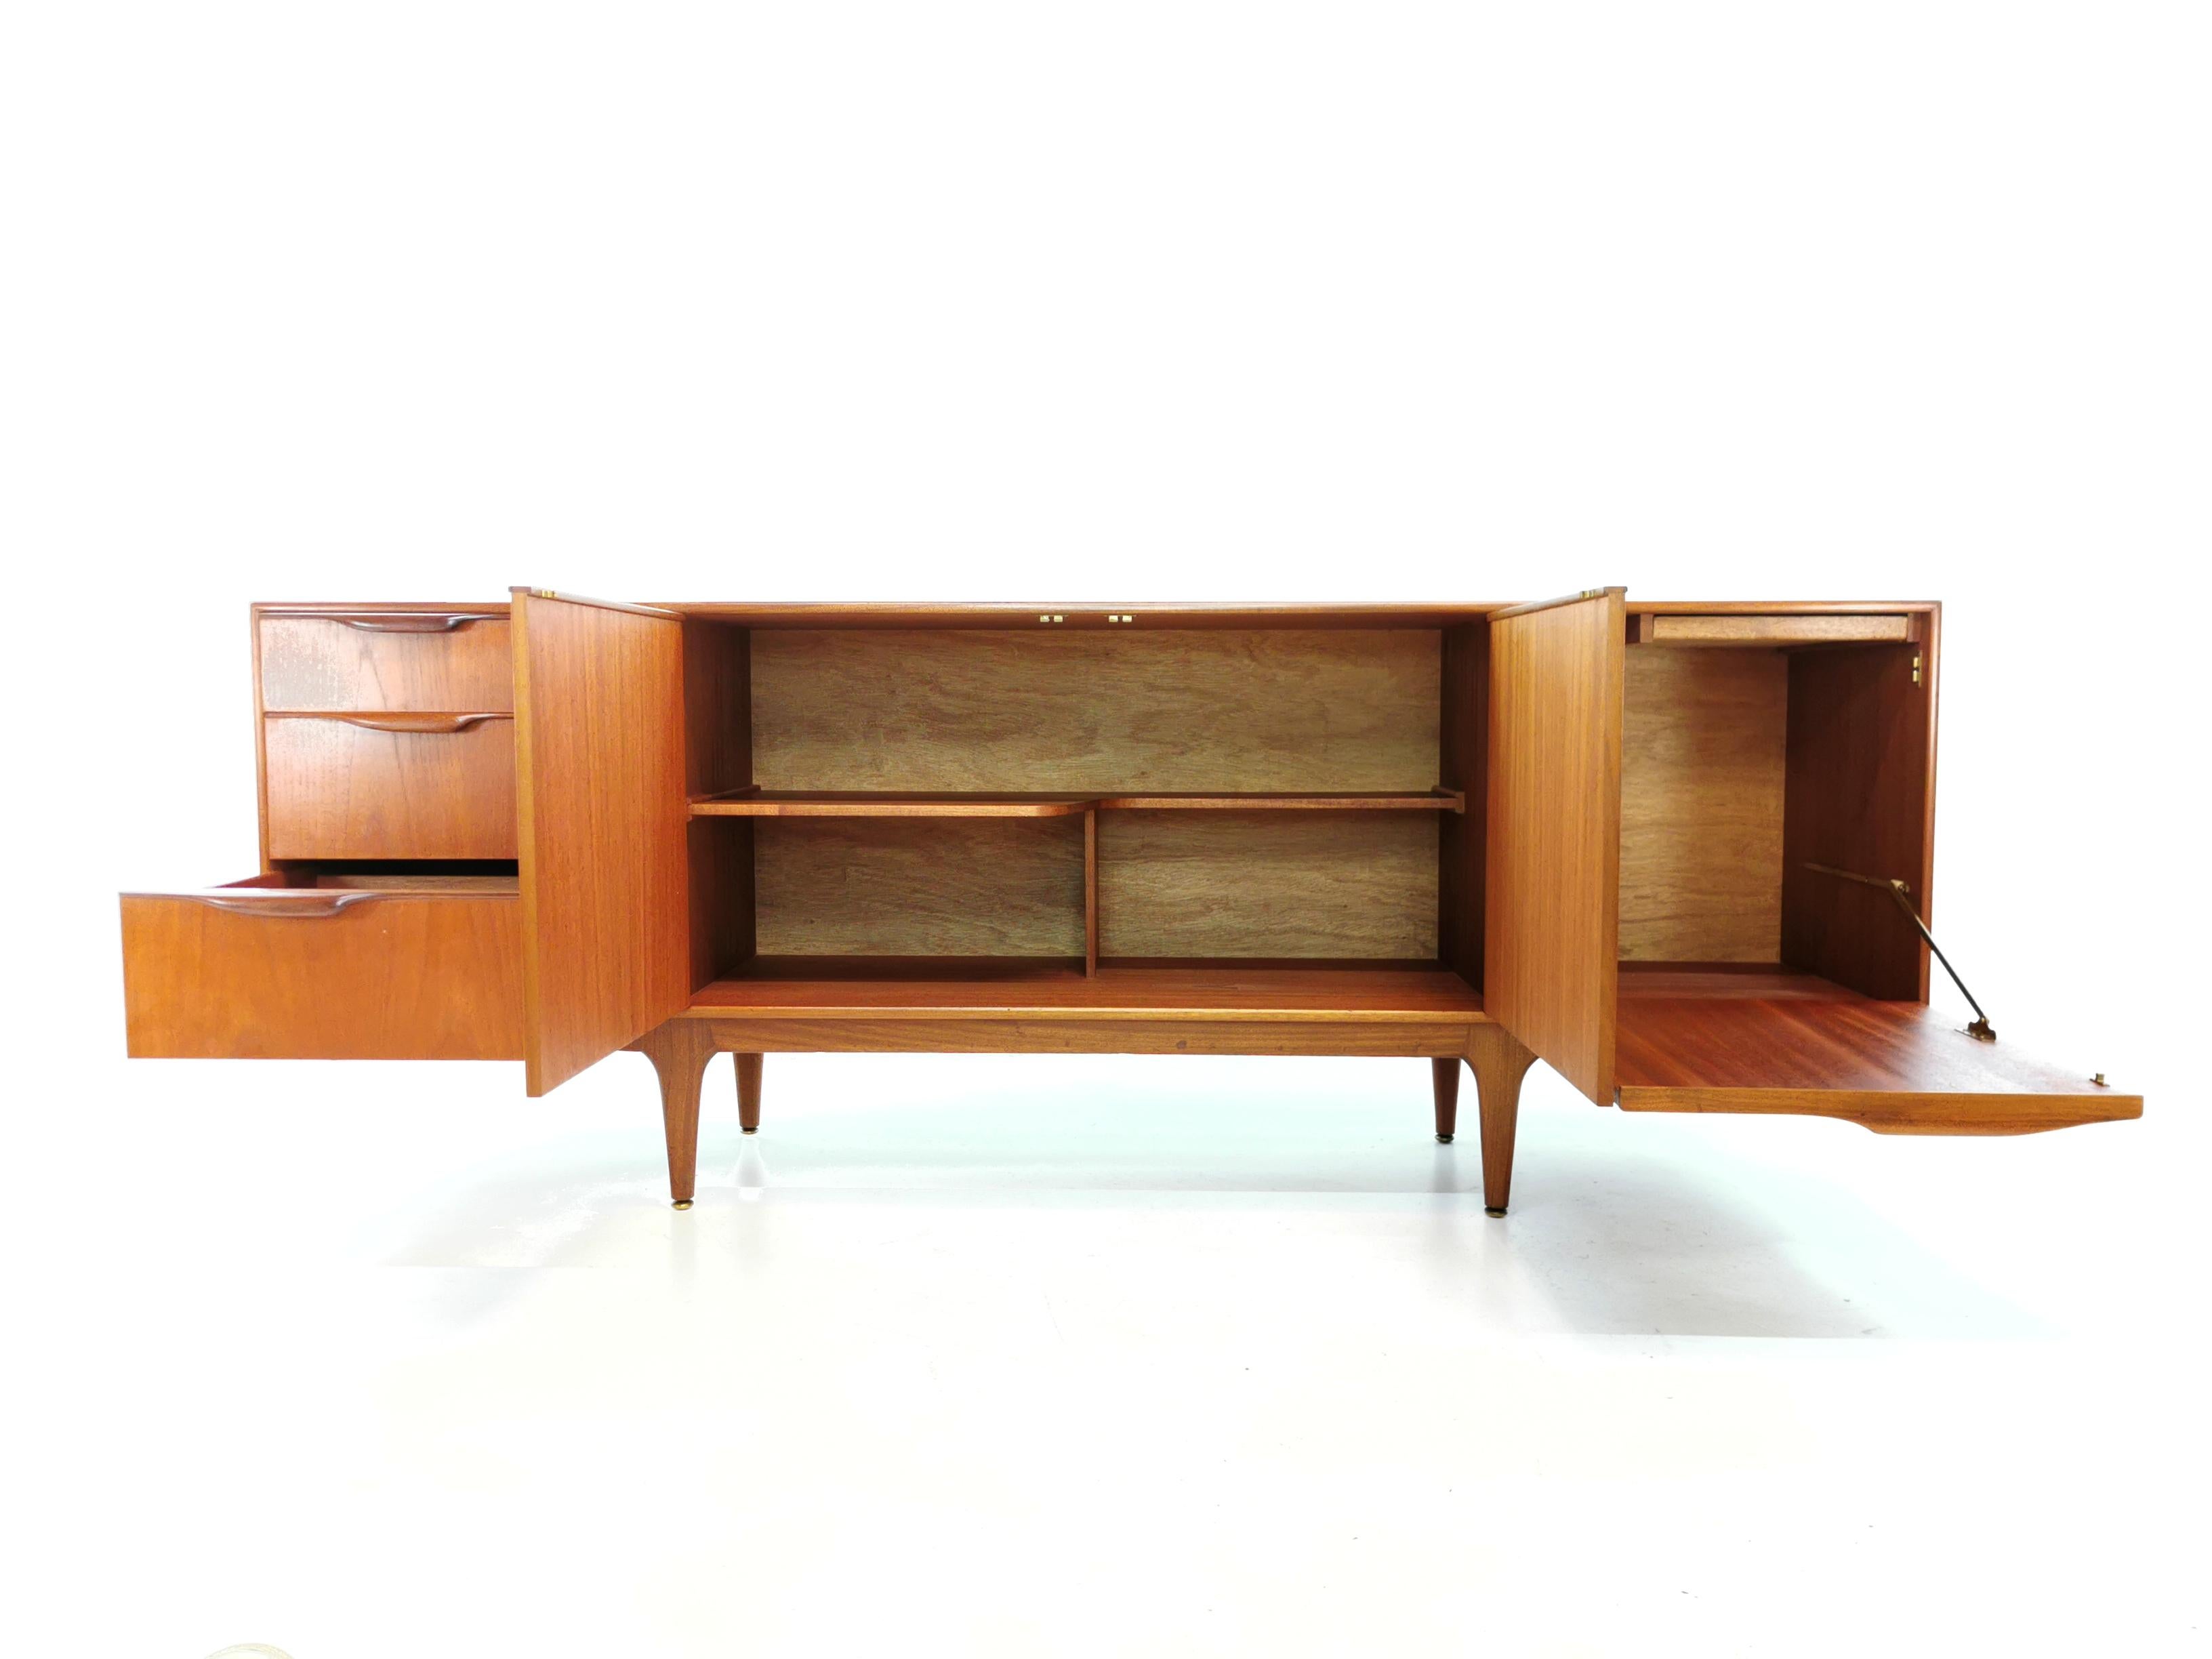 AH McIntosh long teak sideboard with fin handles. Designed by Tom Robertson, UK,
1960s. From the Dunvegan range.
Excellent condition. Refurbished and treaded with Danish oil.